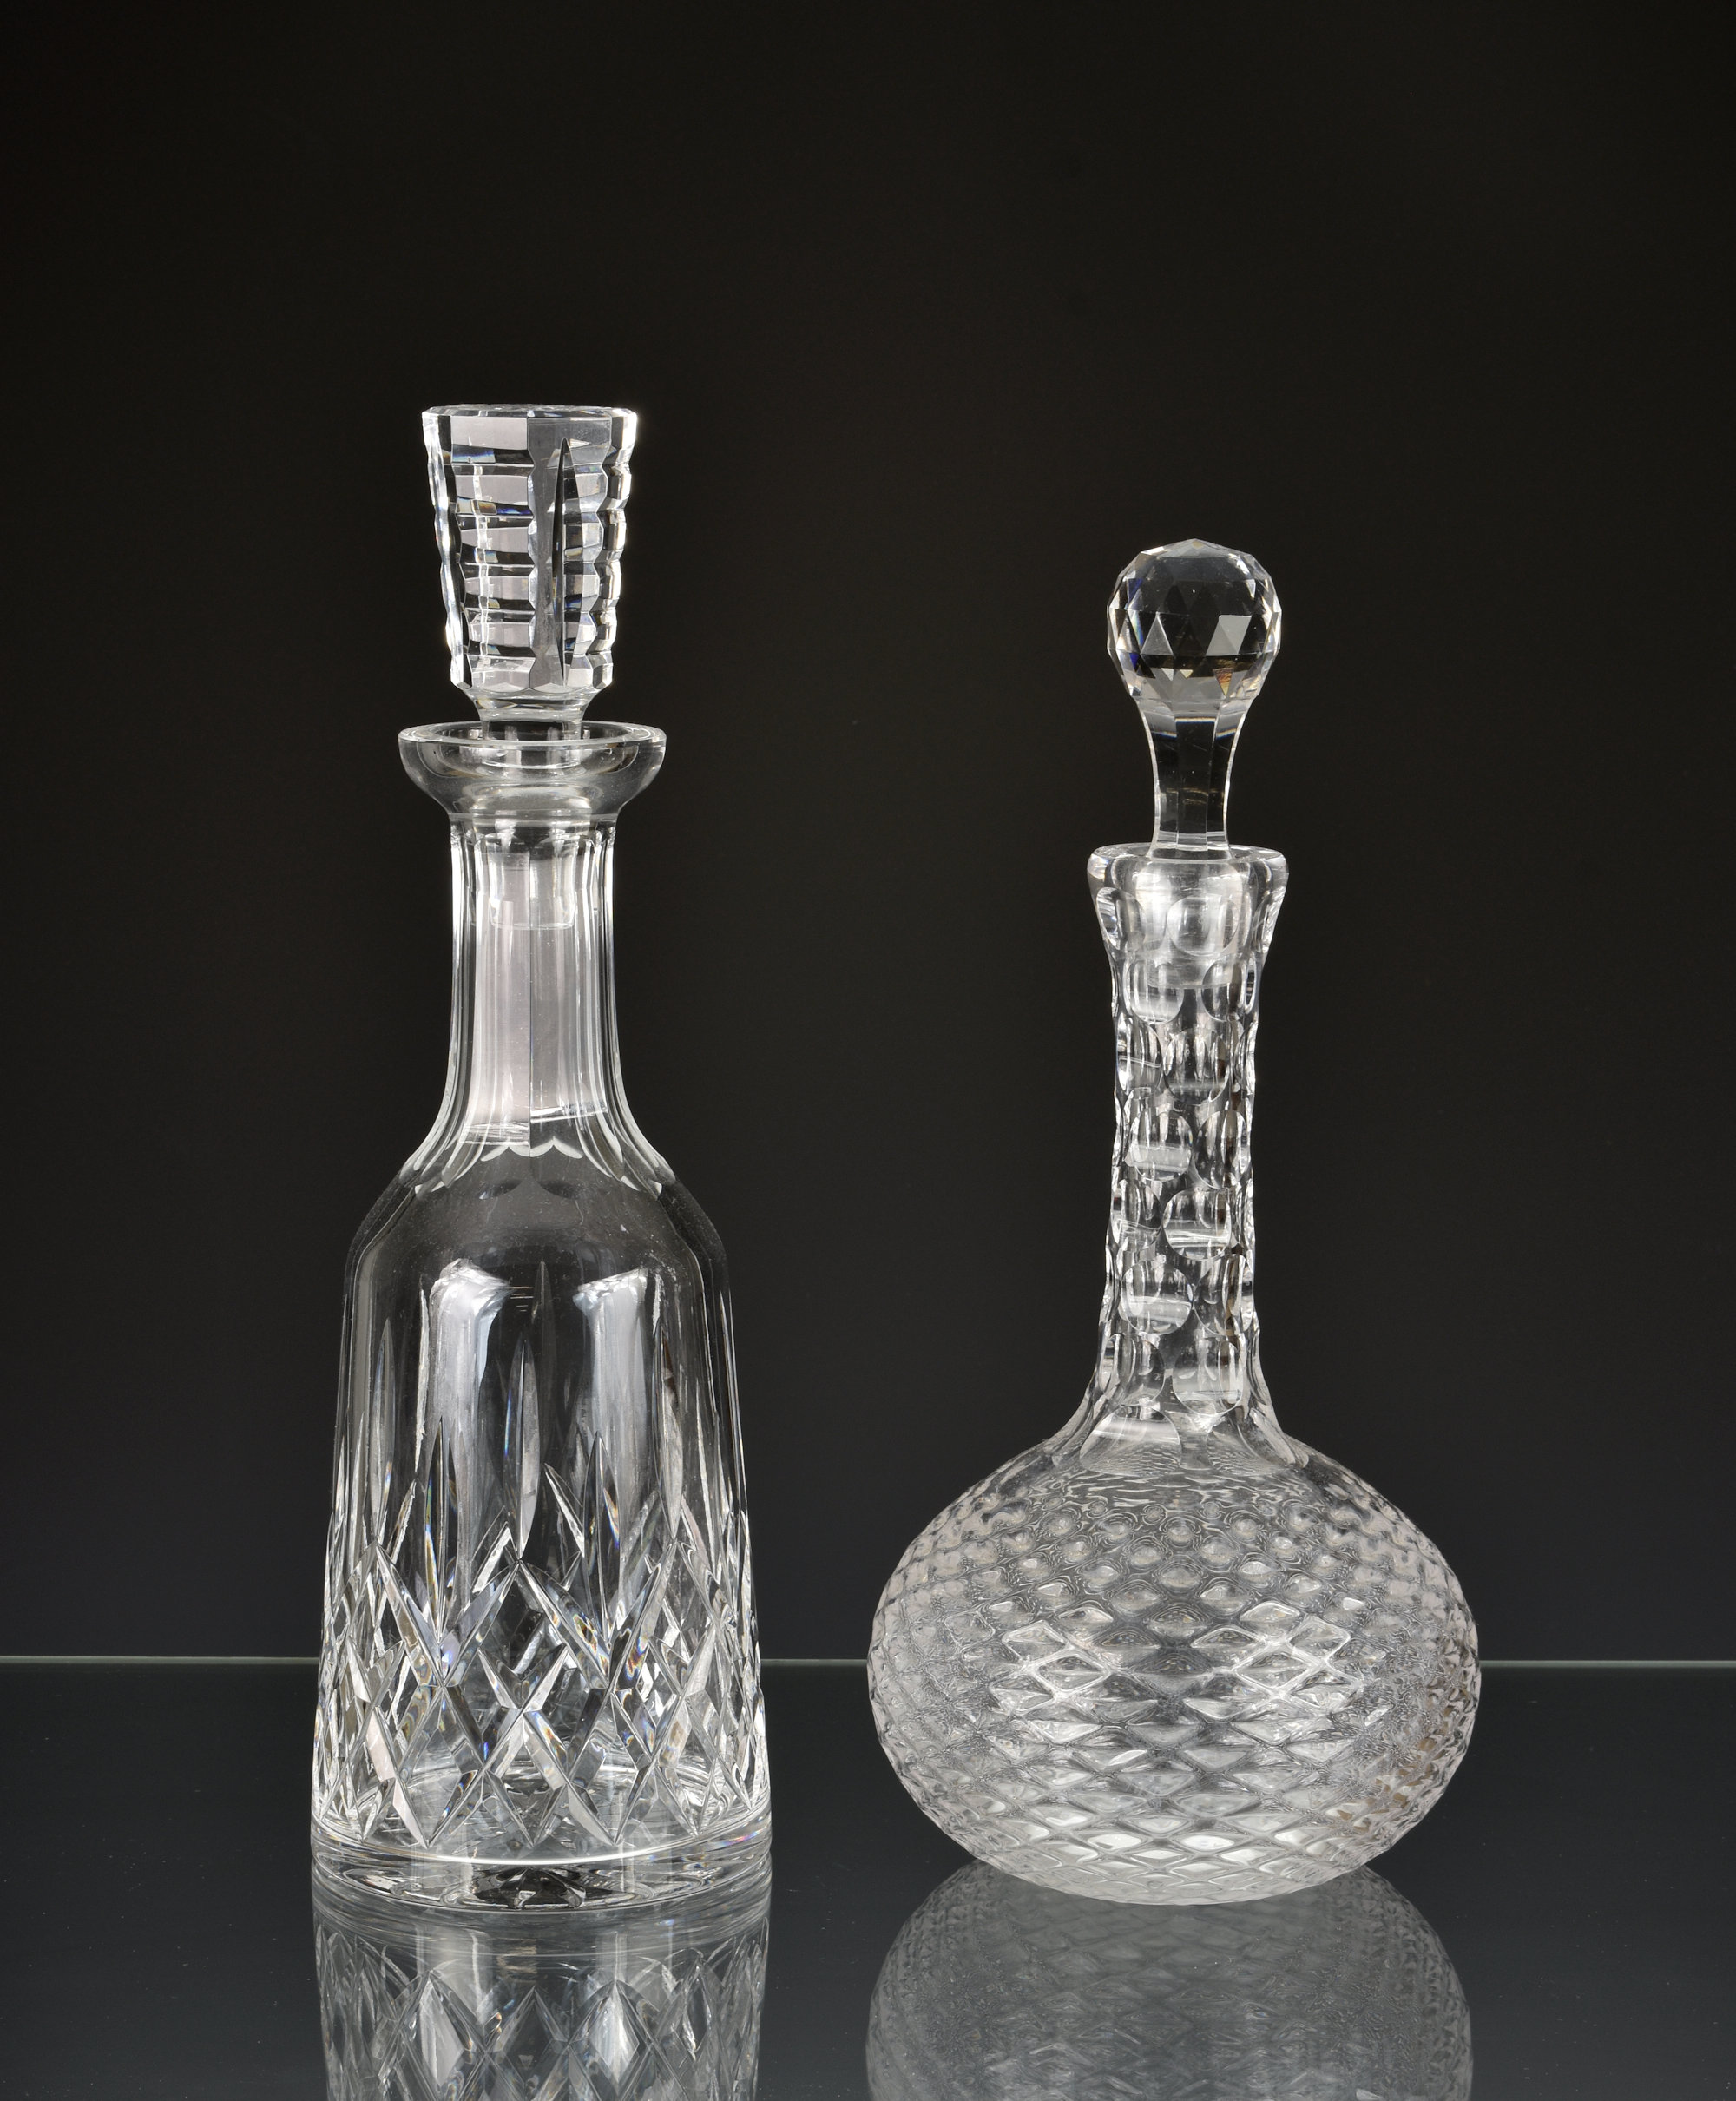 A Waterford crystal glass decanter in the 'Lismore' pattern, the elegant decanter with tapered